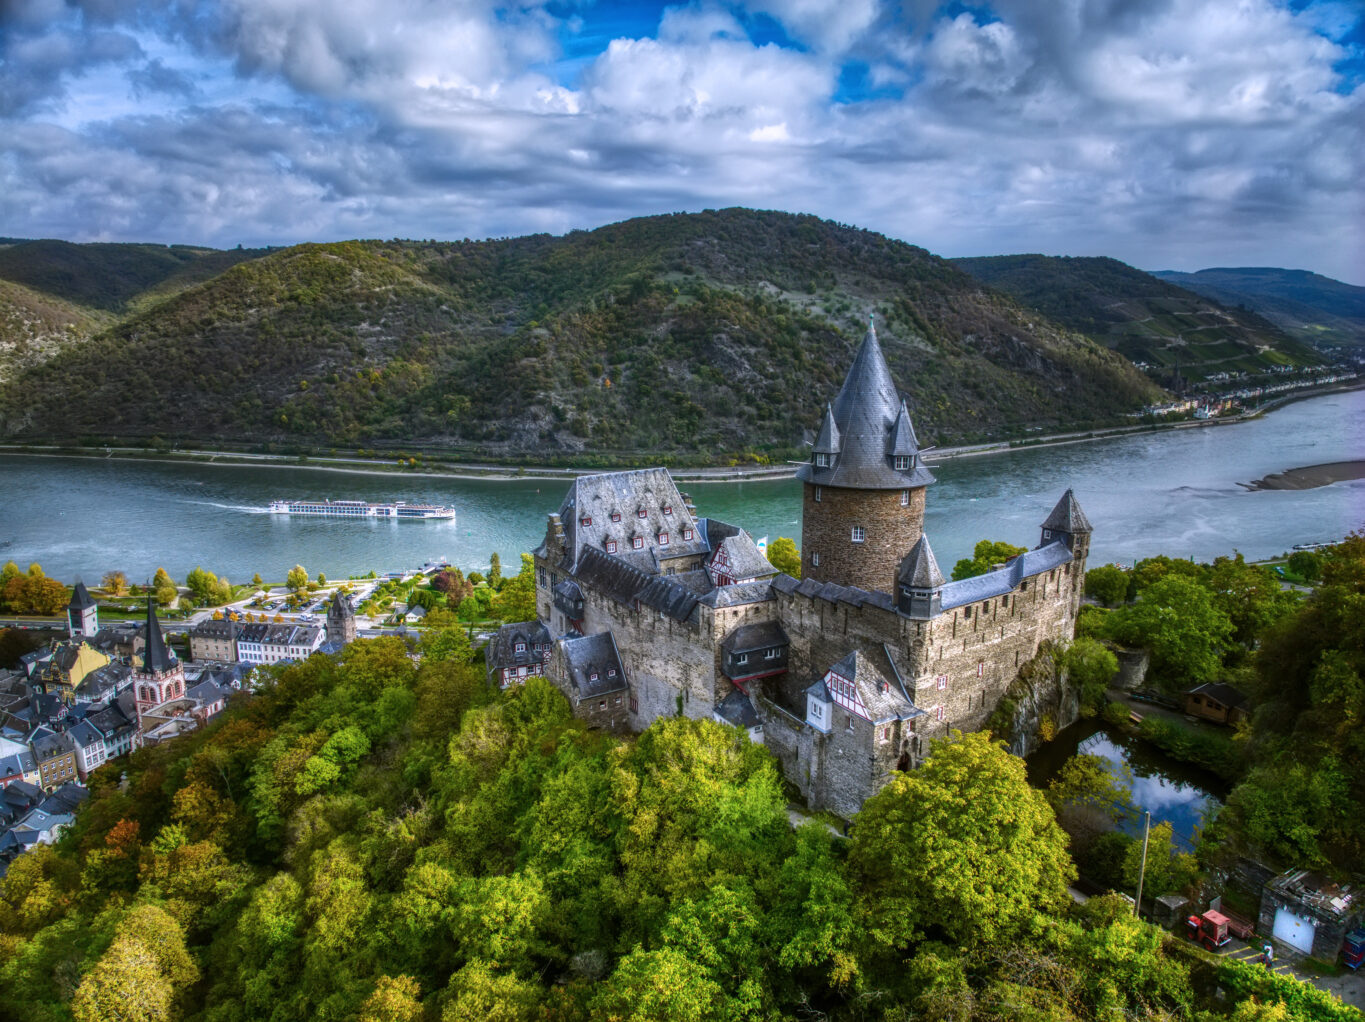 Viking Longship Gymir on the Rhine River with Stahleck Castle (German: Burg Stahleck) a 12th-century fortified castle in the Upper Middle Rhine Valley at Bacharach in Rhineland-Palatinate, Germany. It stands on a crag approximately 160 metres (520 ft) above sea level on the left bank of the river at the mouth of the Steeg valley, approximately 50 kilometres (31 mi) south of Koblenz, and offers a commanding view of the Lorelei valley in Germany.